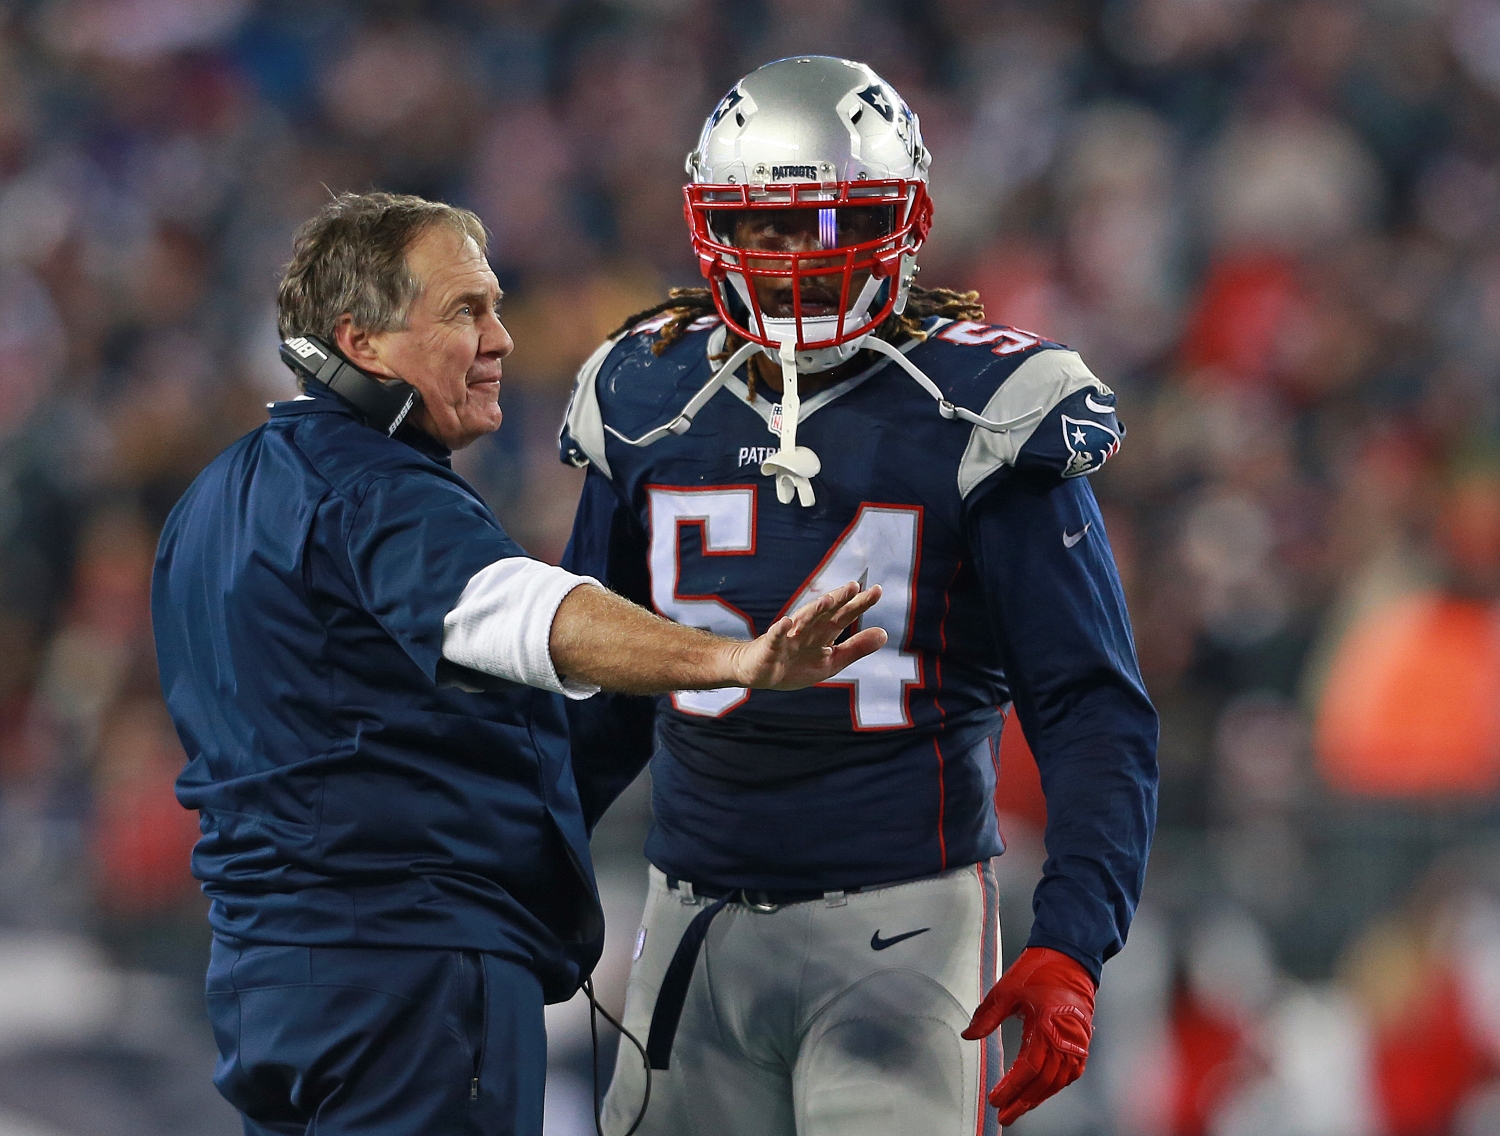 New England Patriots head coach Bill Belichick chats with outside linebacker Dont'a Hightower in the second quarter of the AFC Divisional Playoff game at Gillette Stadium on Saturday, January 16, 2016.